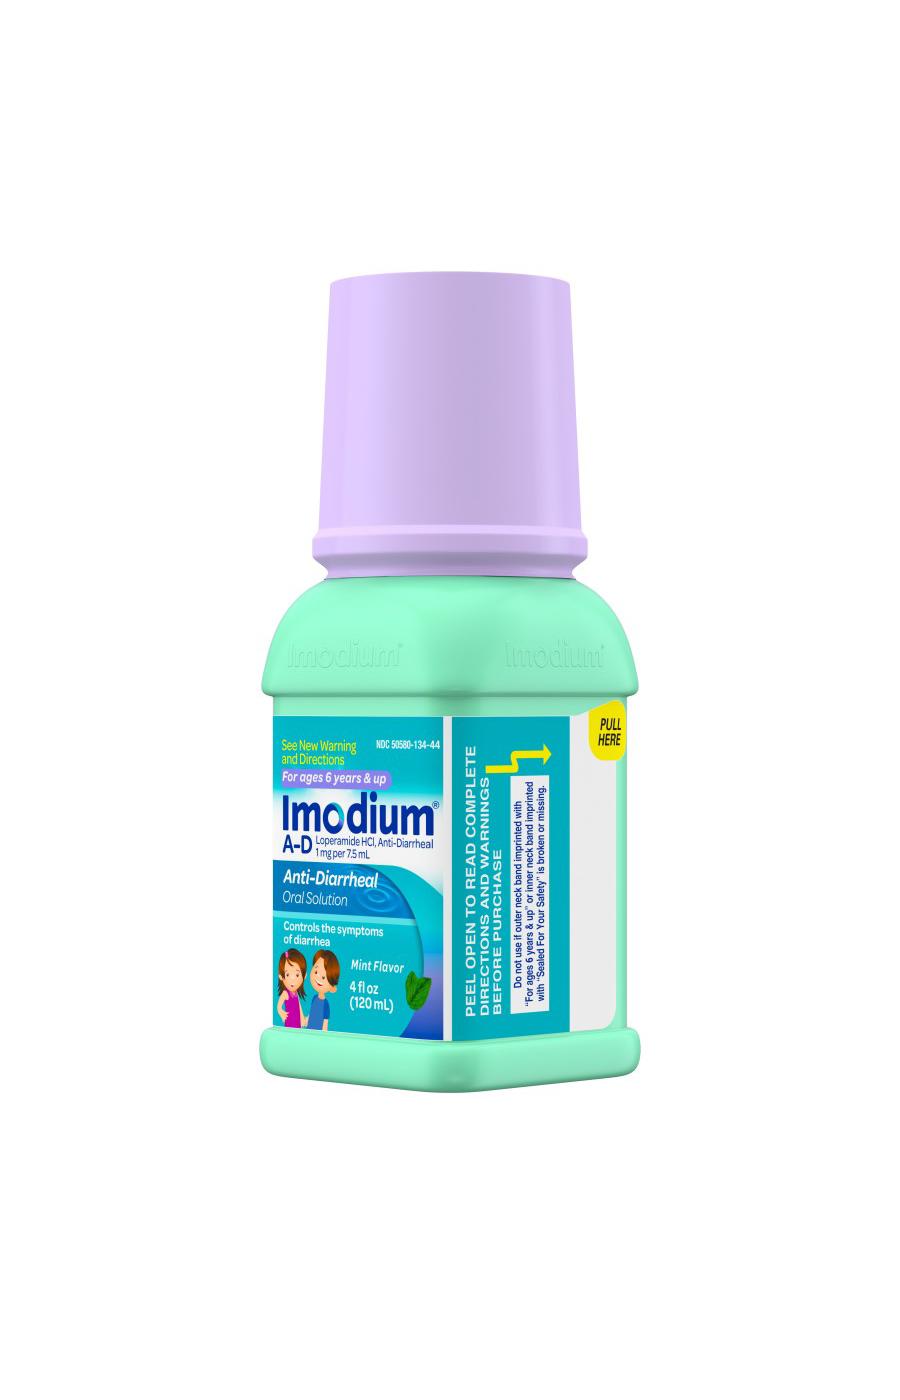 Imodium A-D Liquid For Use In Children; image 5 of 7